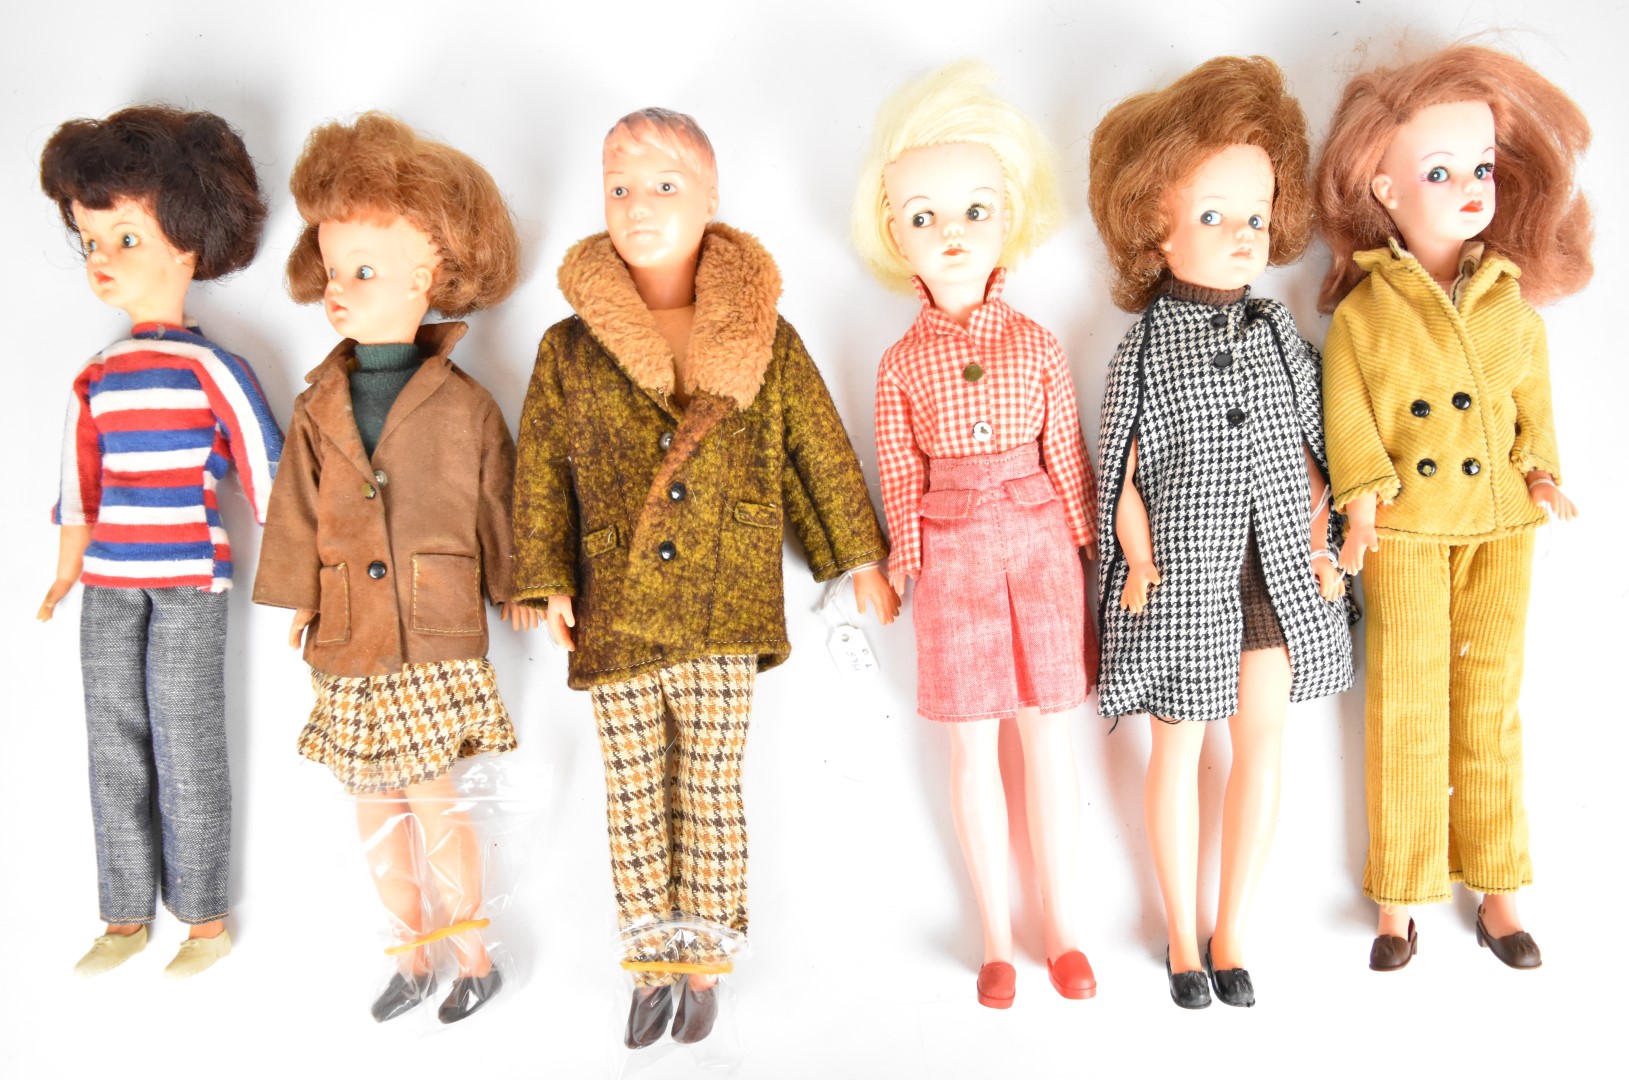 Six vintage Sindy and Paul dolls by Pedigree dressed in original 1960's outfits to include